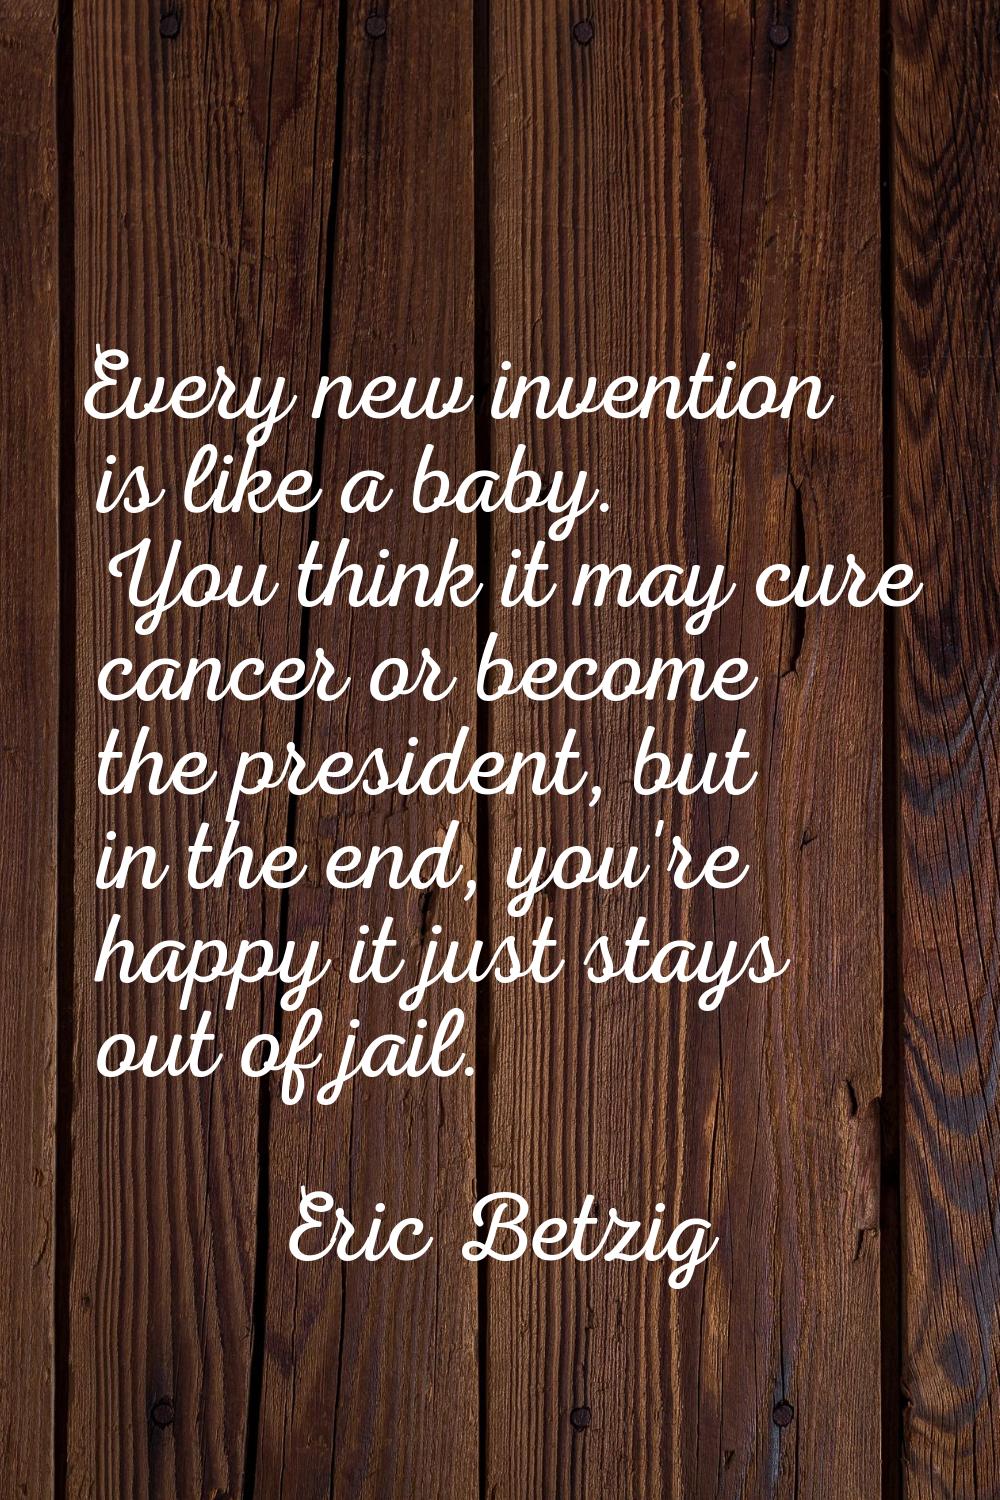 Every new invention is like a baby. You think it may cure cancer or become the president, but in th